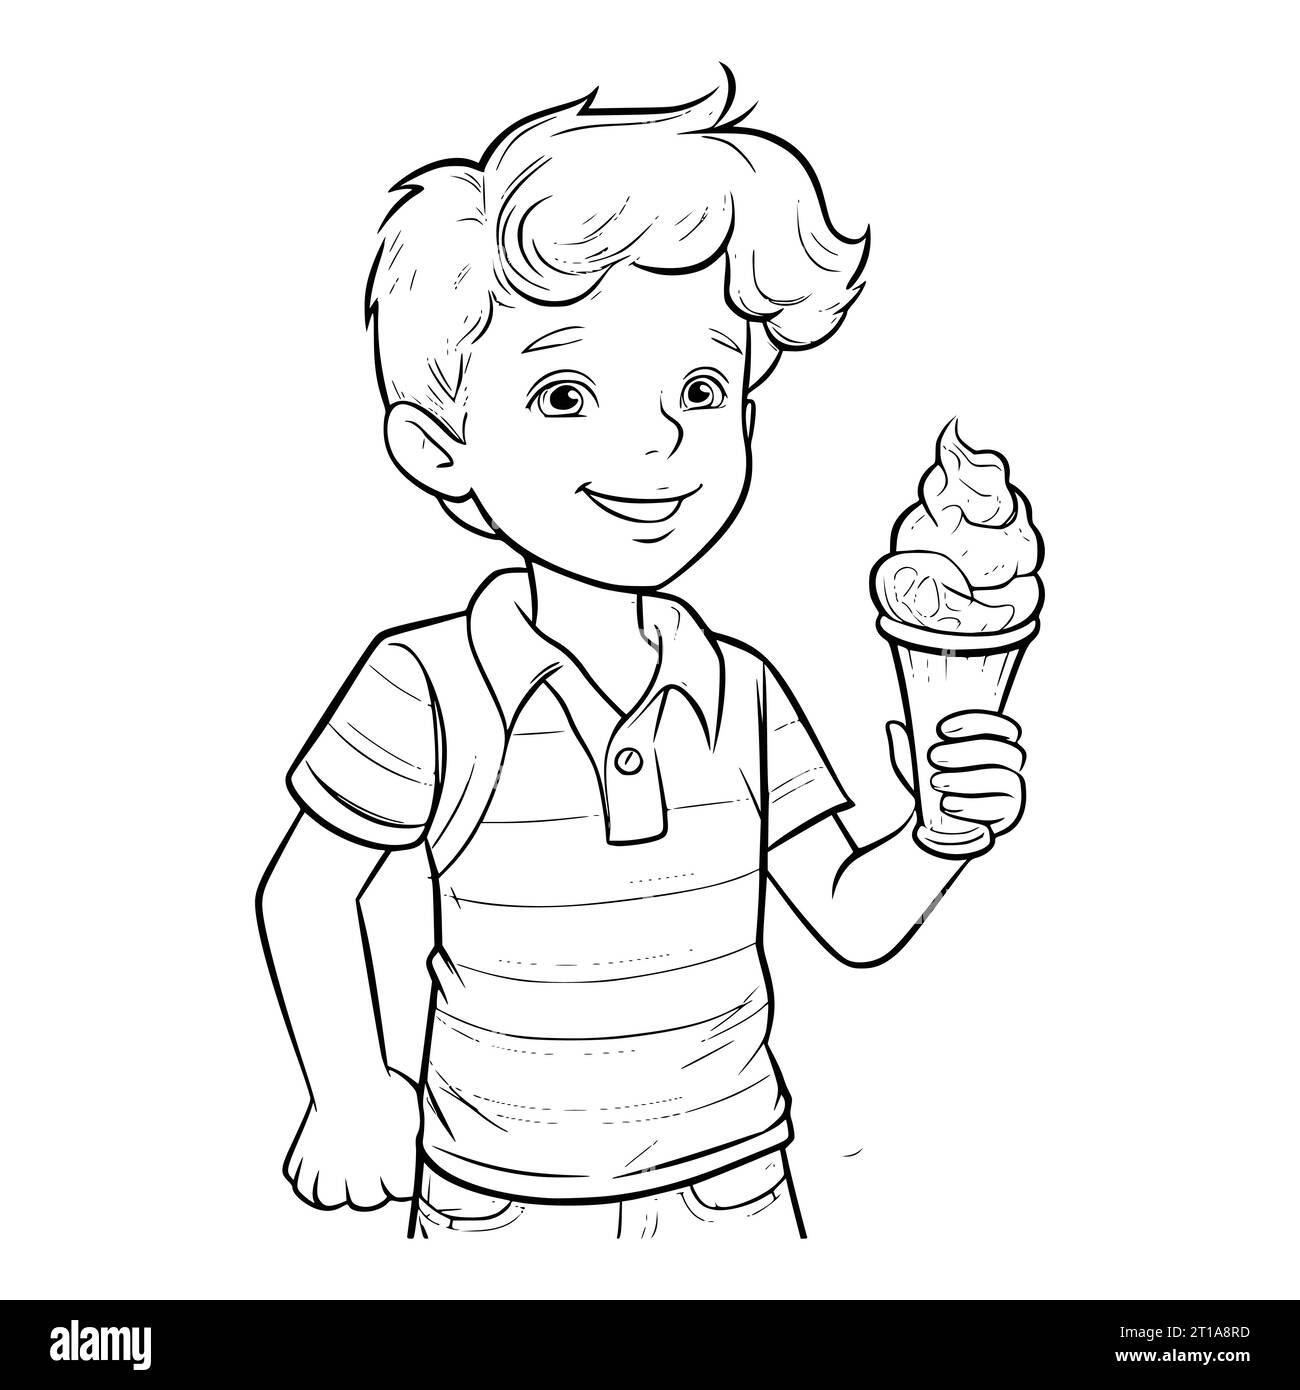 Boy Holding Ice Cream Coloring Page For Kids Stock Vector